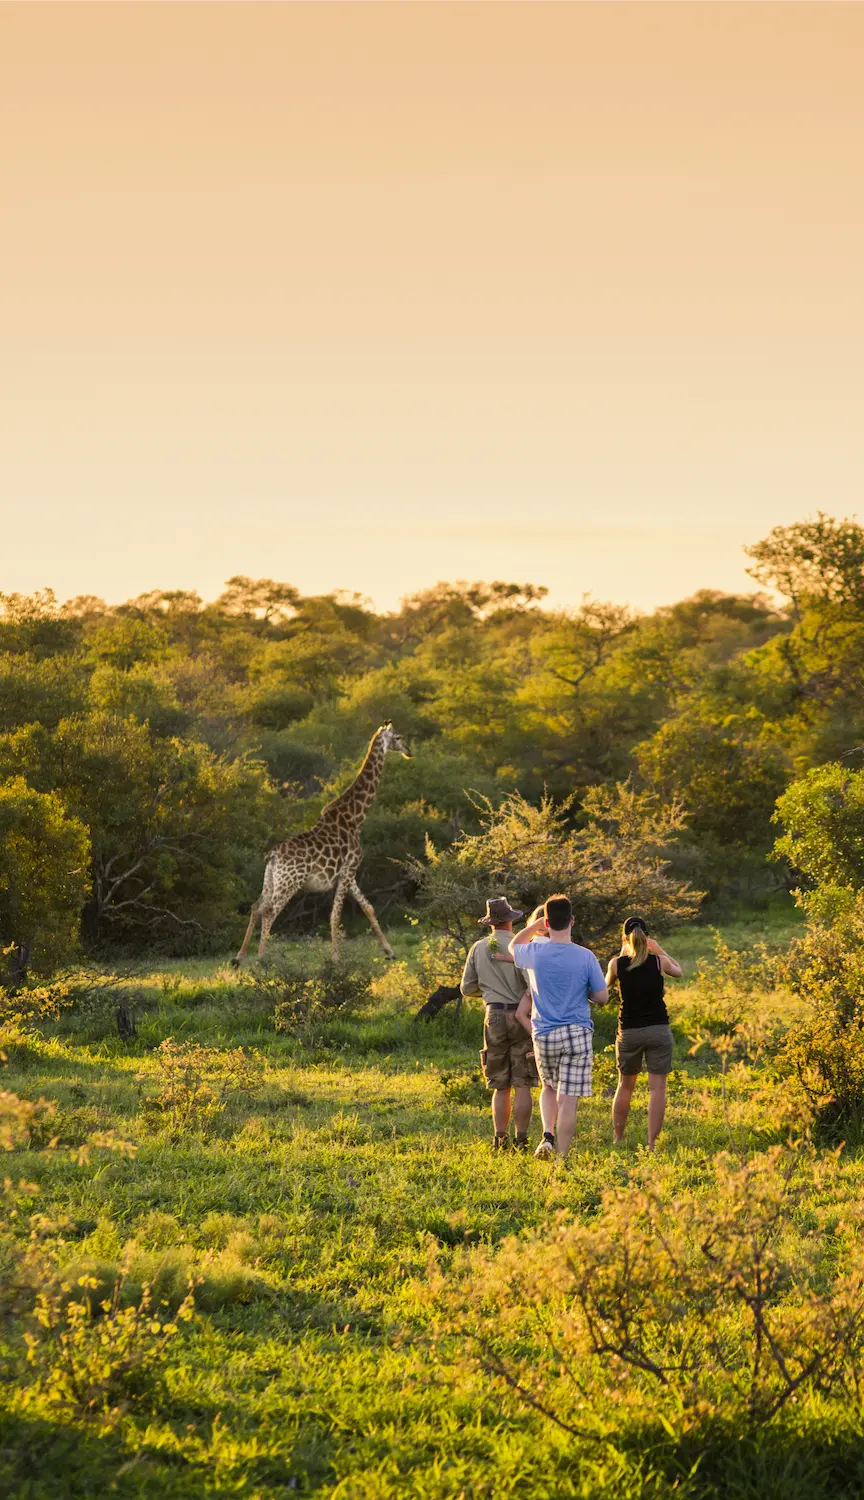 Couple spotting a Giraffe on a guided safari walk in South Africa